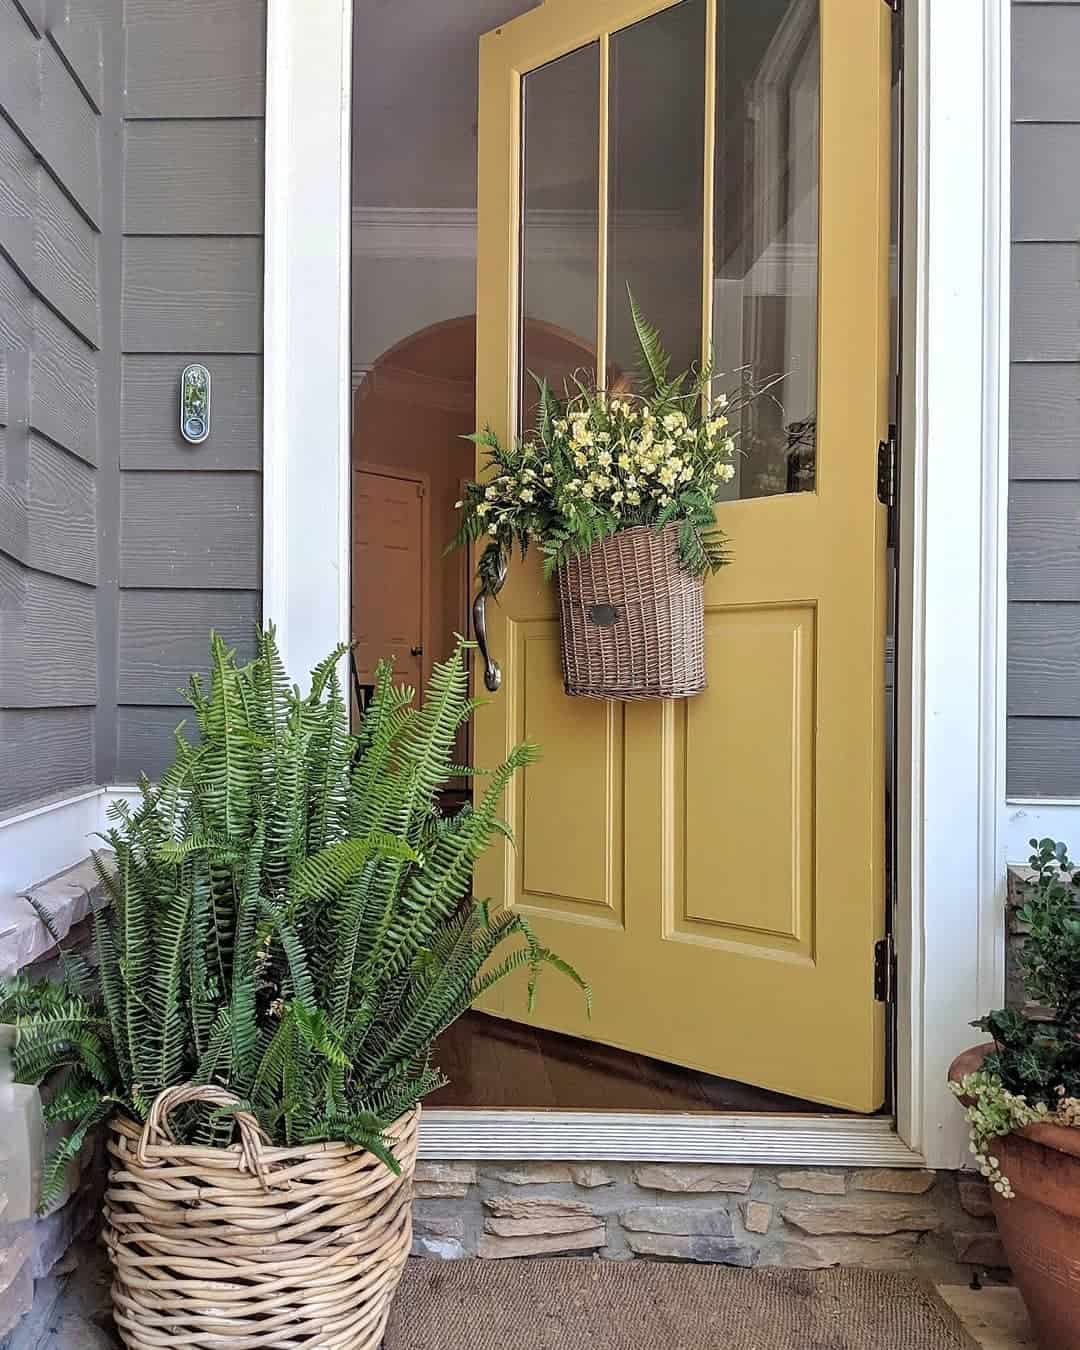 https://www.soulandlane.com/wp-content/uploads/2022/08/Front-Door-with-Basket-of-Green-Leaves-and-Yellow-Flowers.jpg